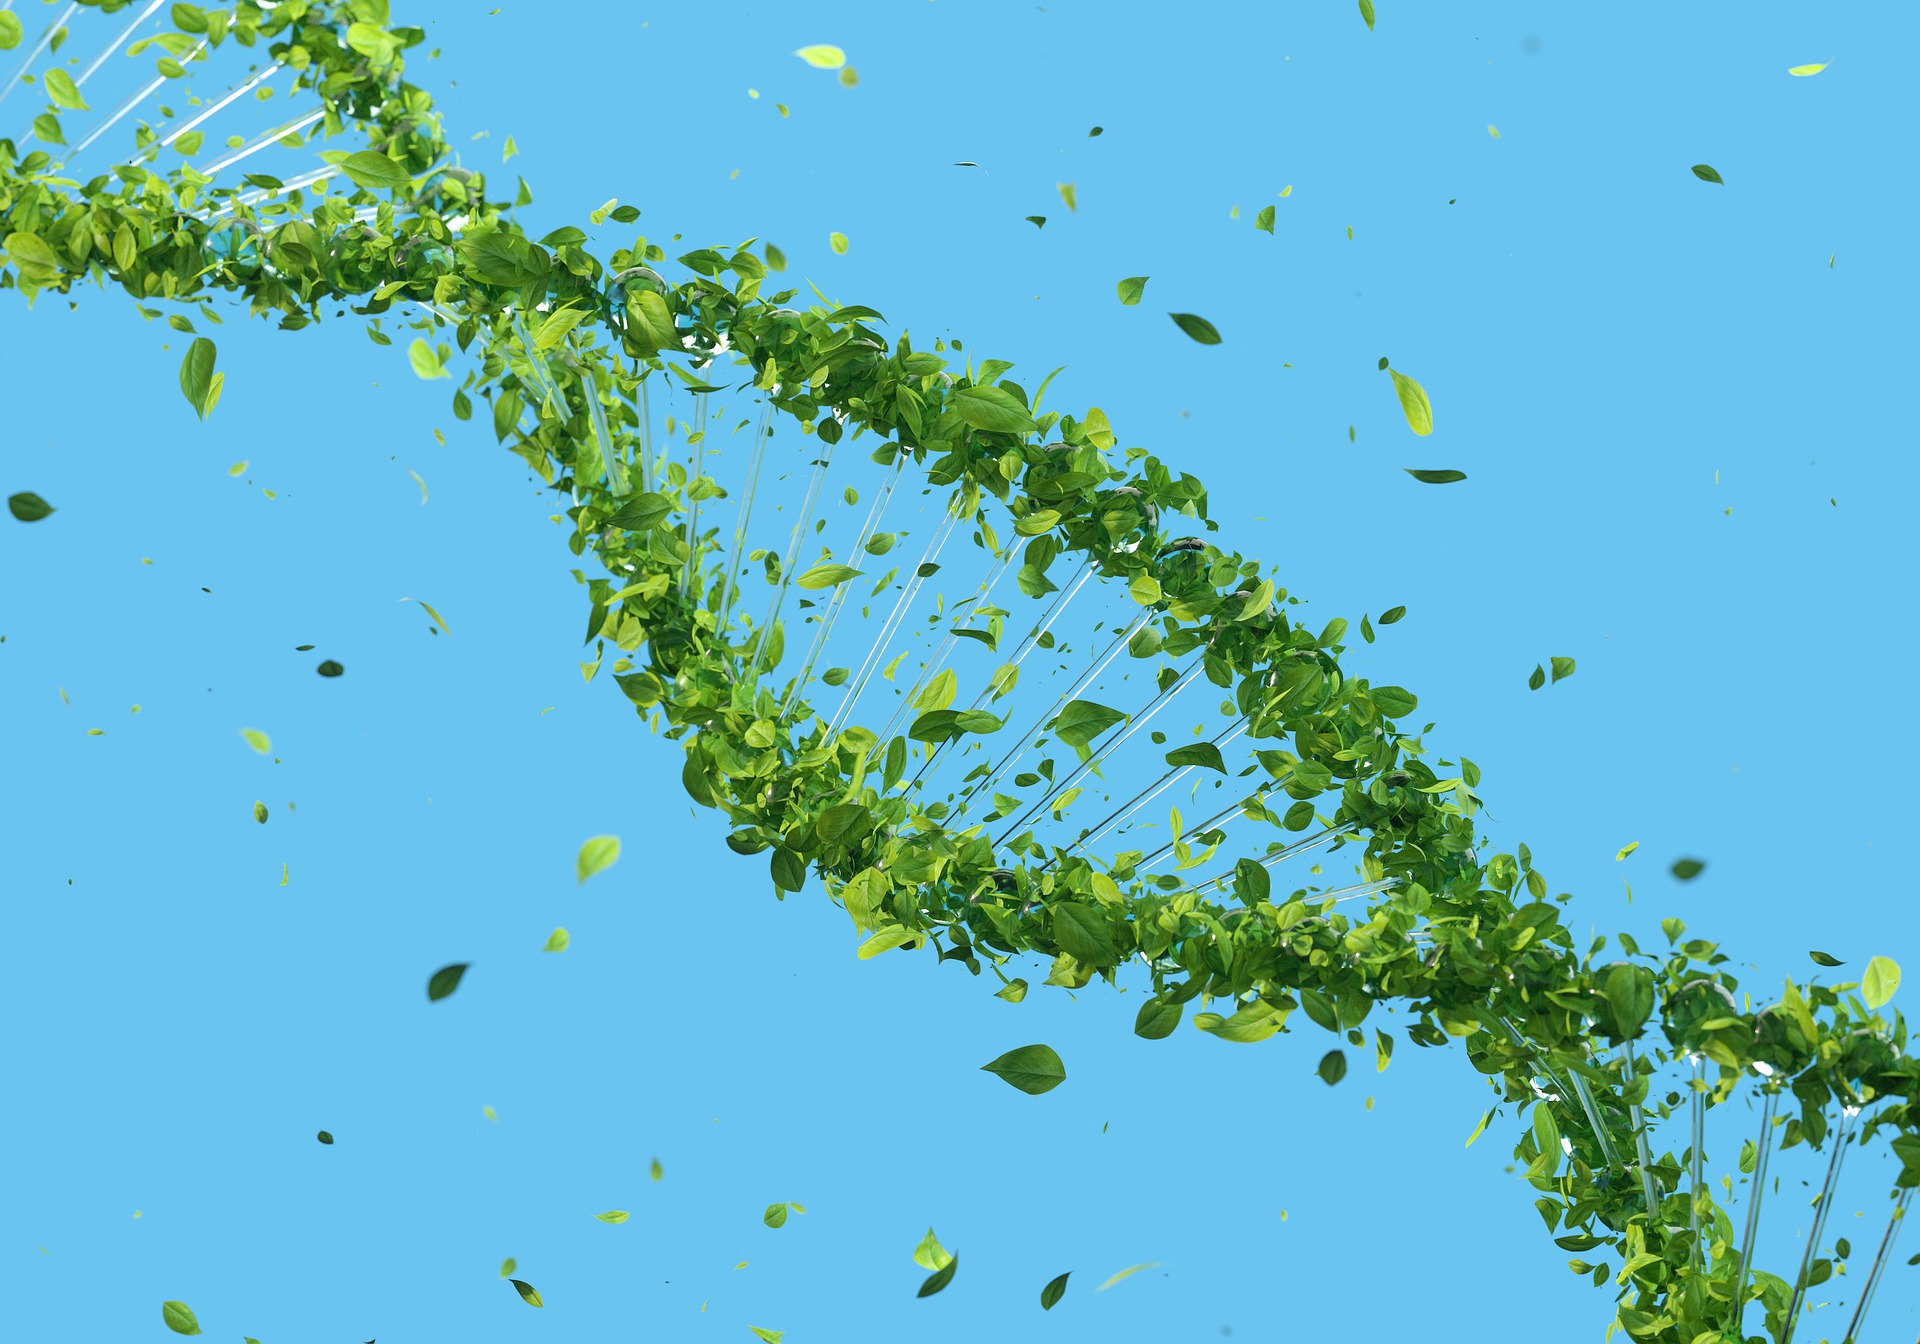 Double DNA helix made with leaves.